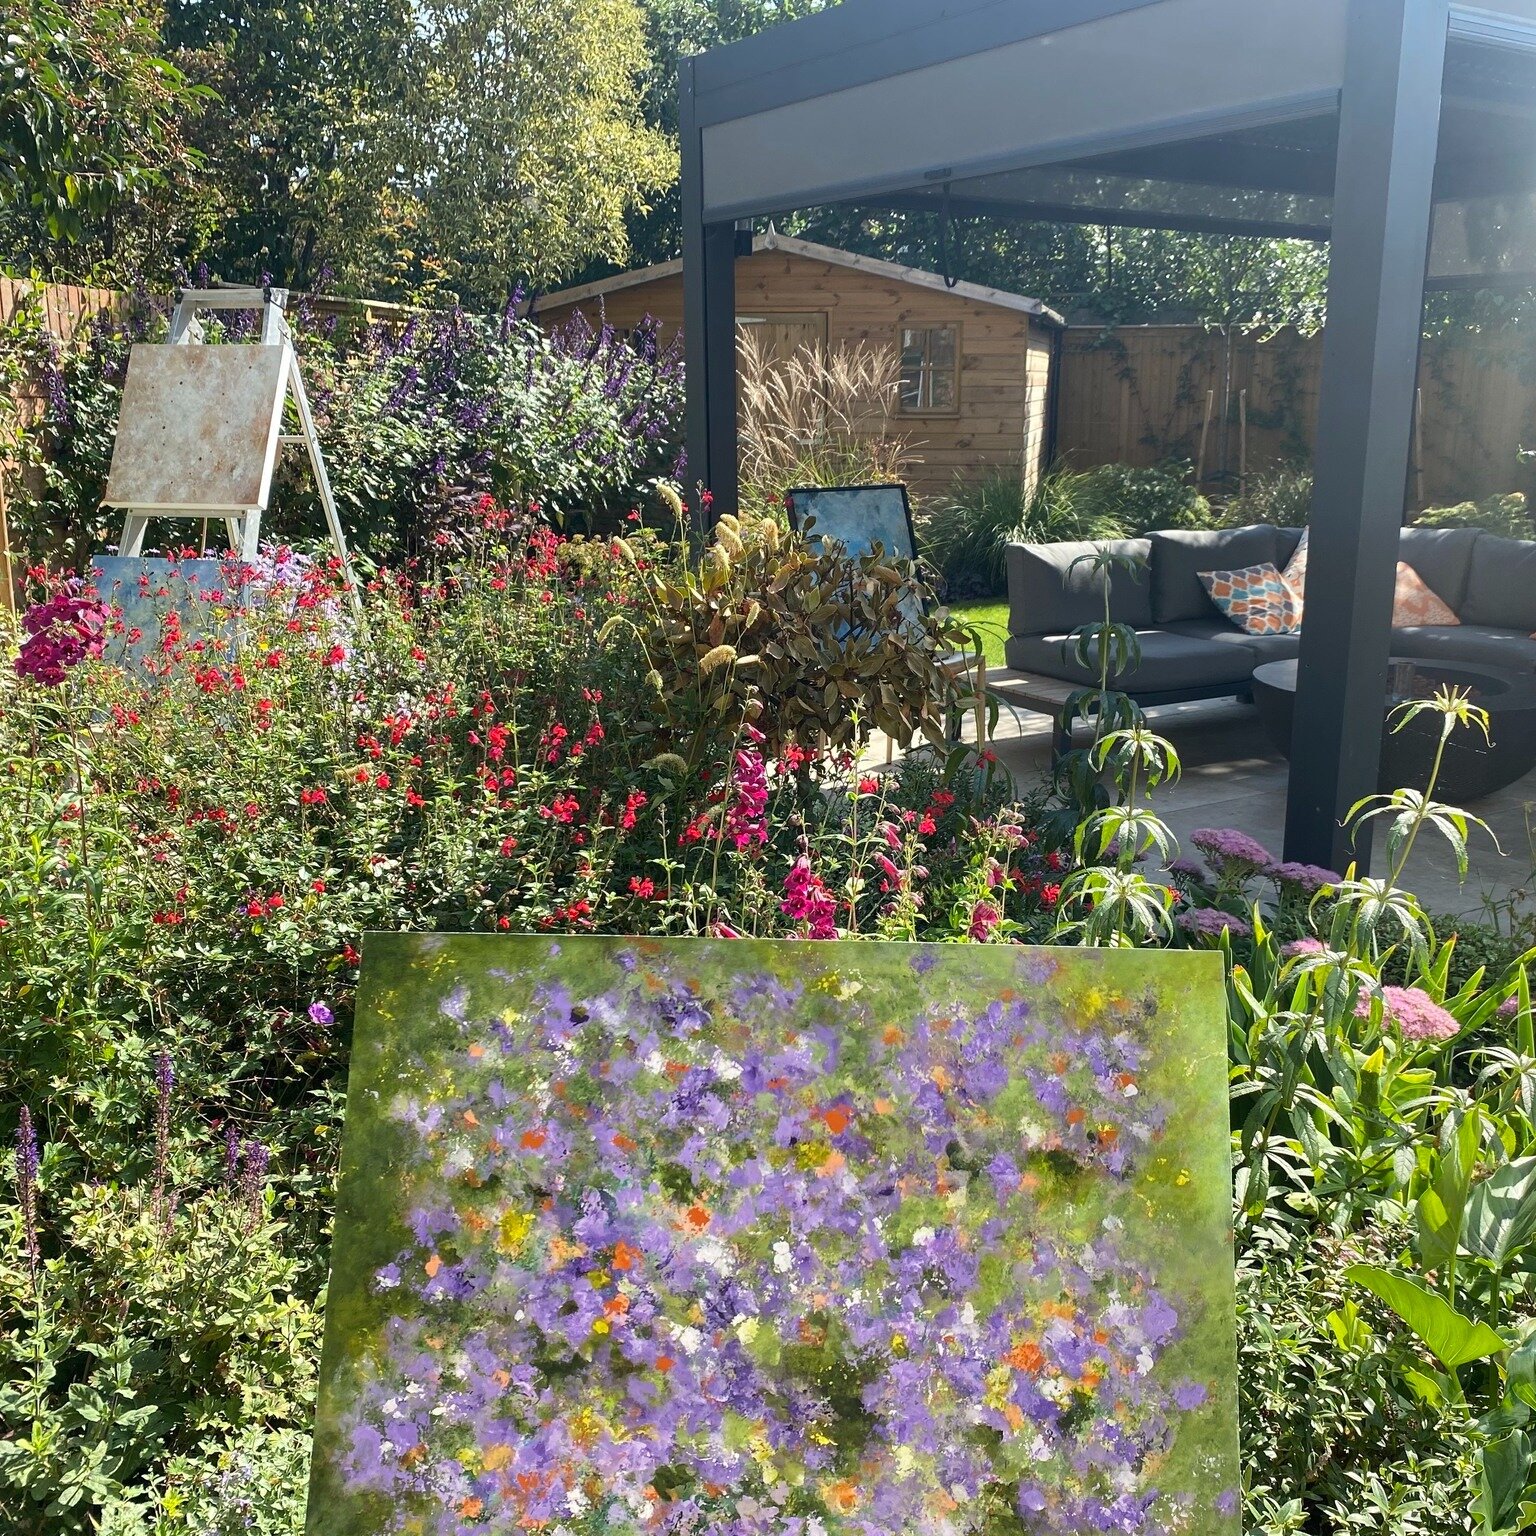 Some more pics of this fabulous art display inspired by the planting in a garden I designed last year. The paintings are by the talented @elainehoweart and the show was part of the @ealingbeat art trail. Made me so happy to see the garden dressed lik